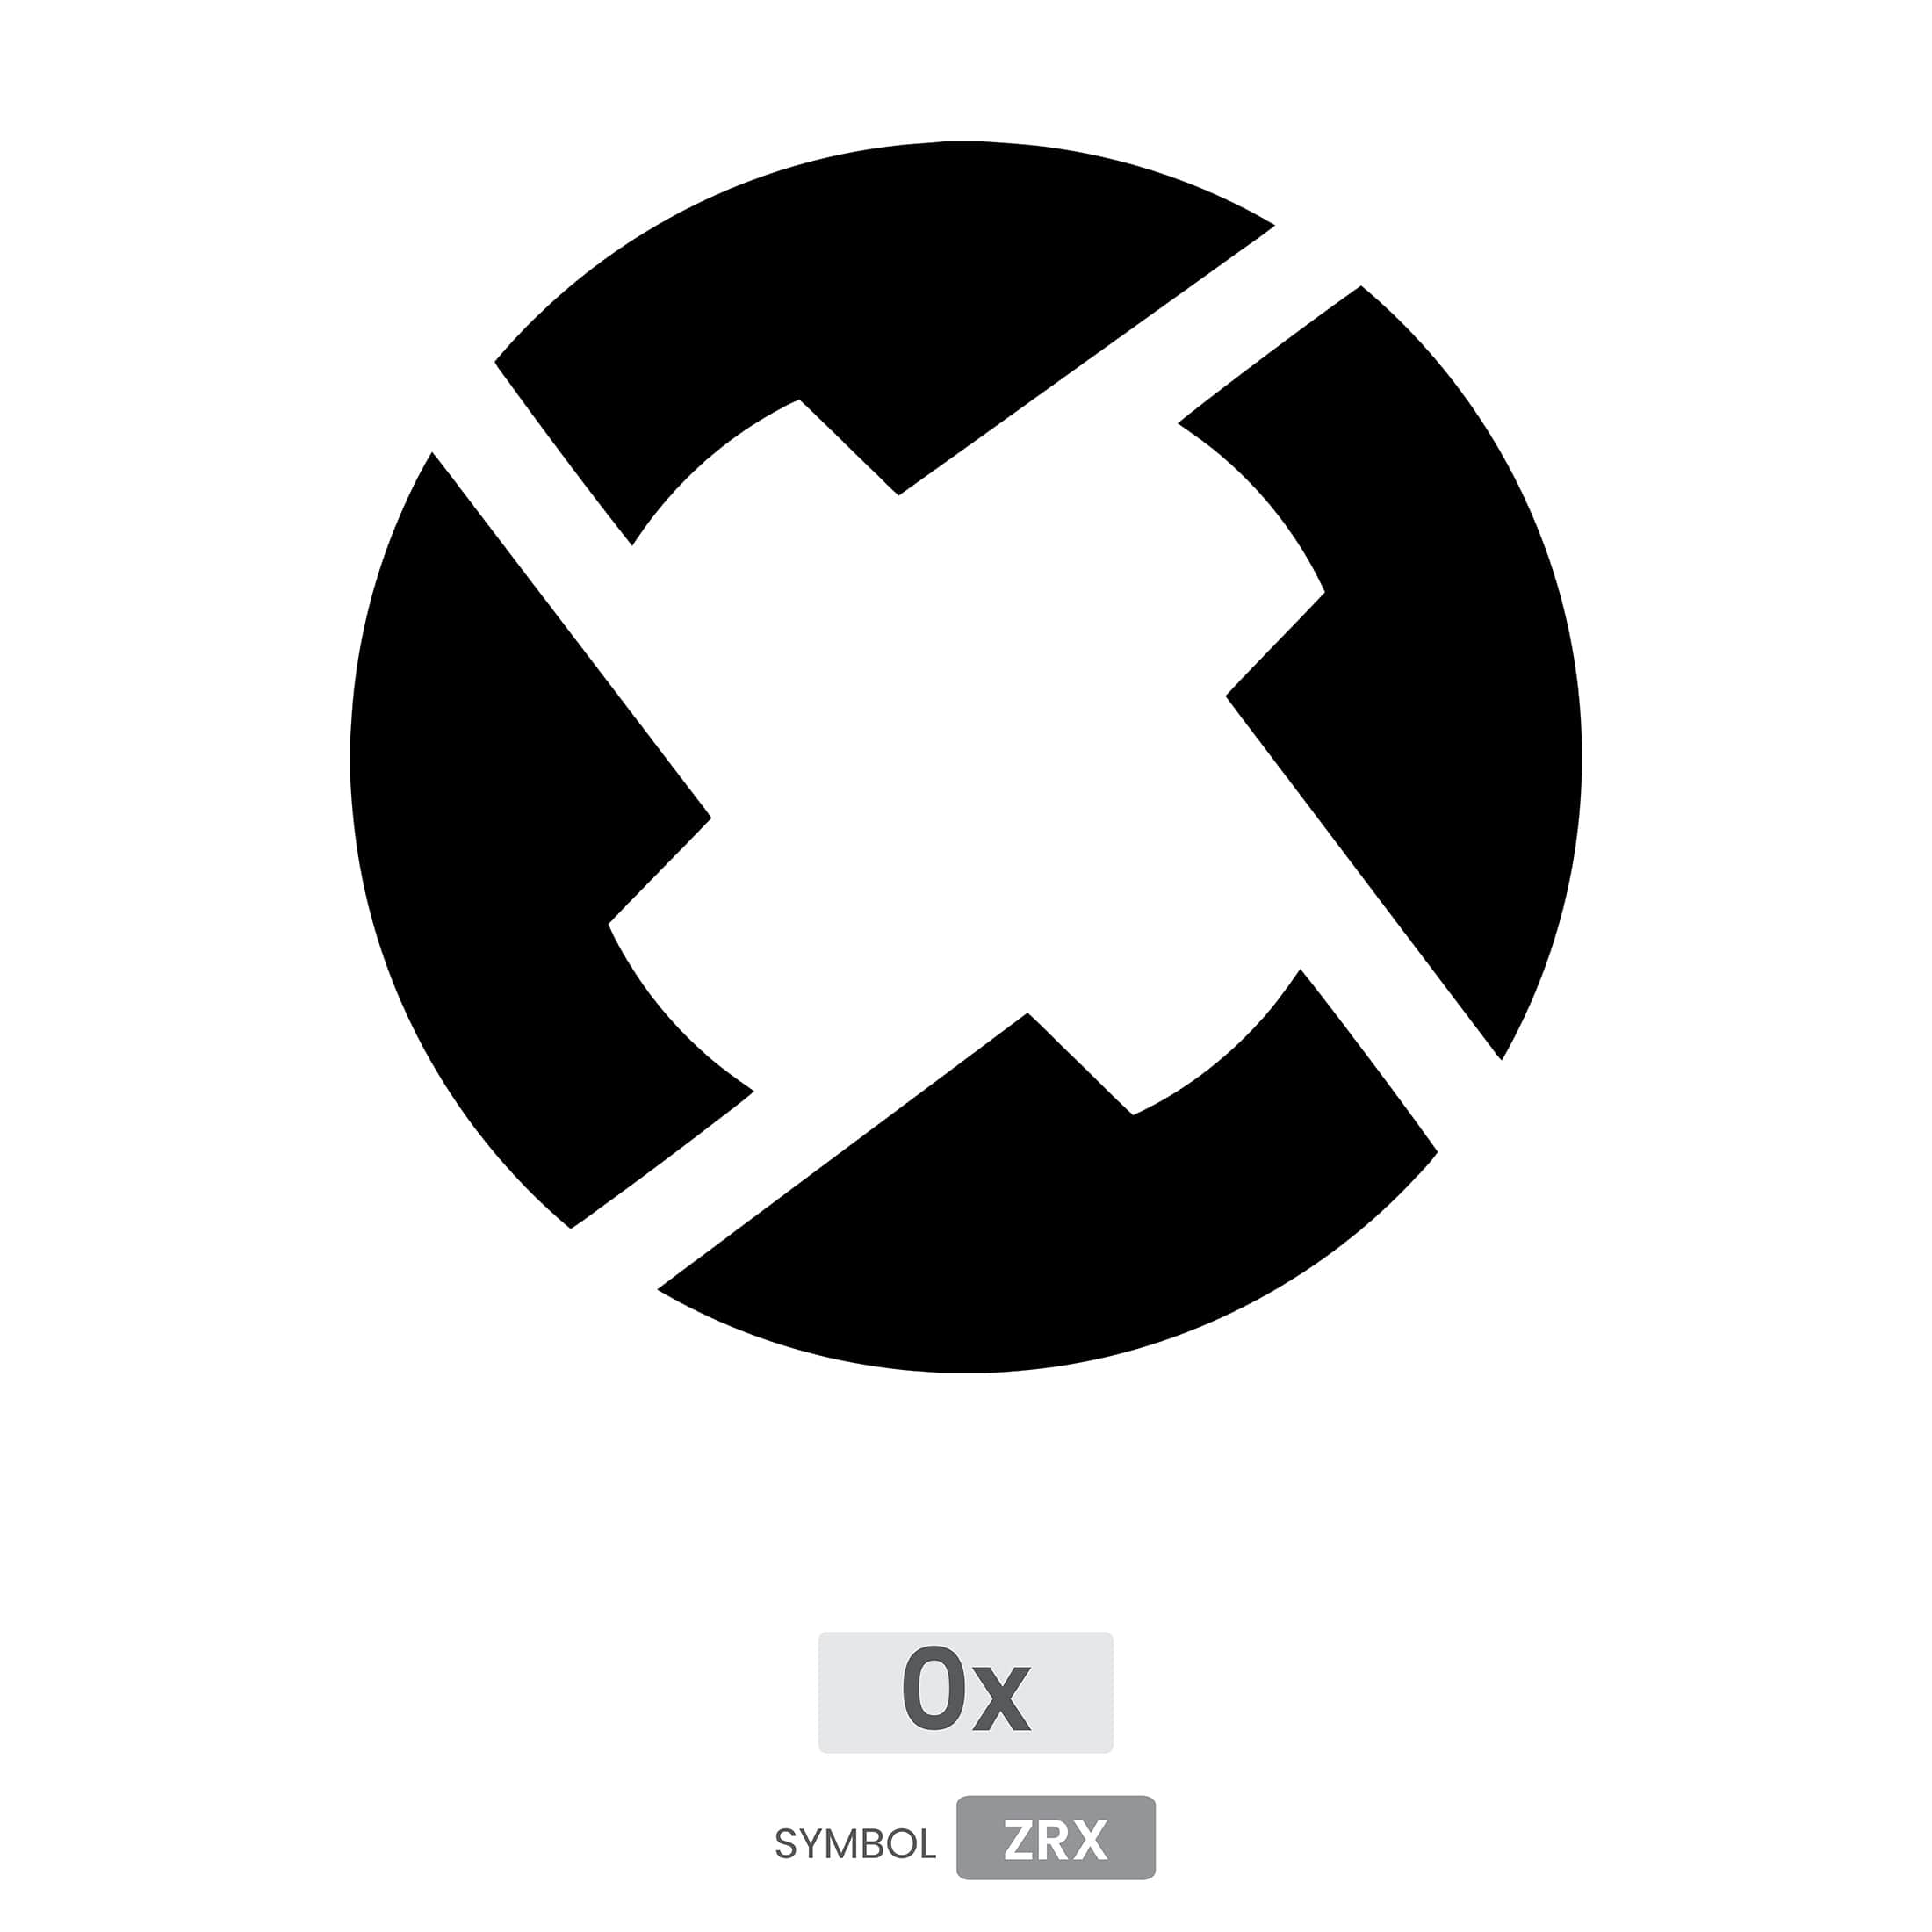 0x (ZRX) crypto currency logo AI and SVG vector free download